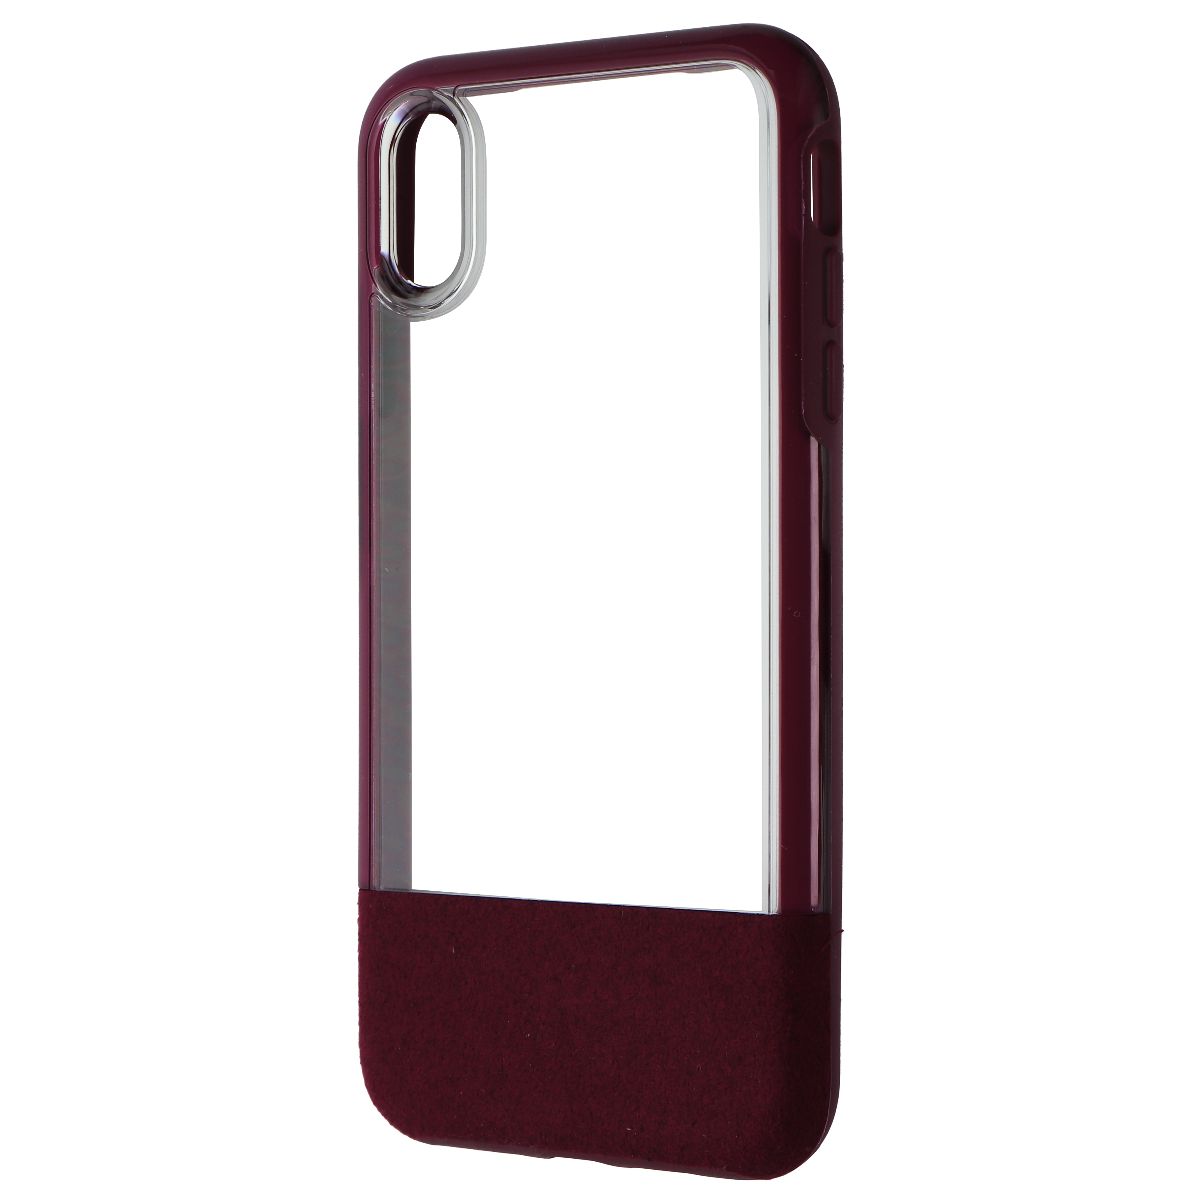 OtterBox Statement Series Case for iPhone Xs Max - Lucent Magenta